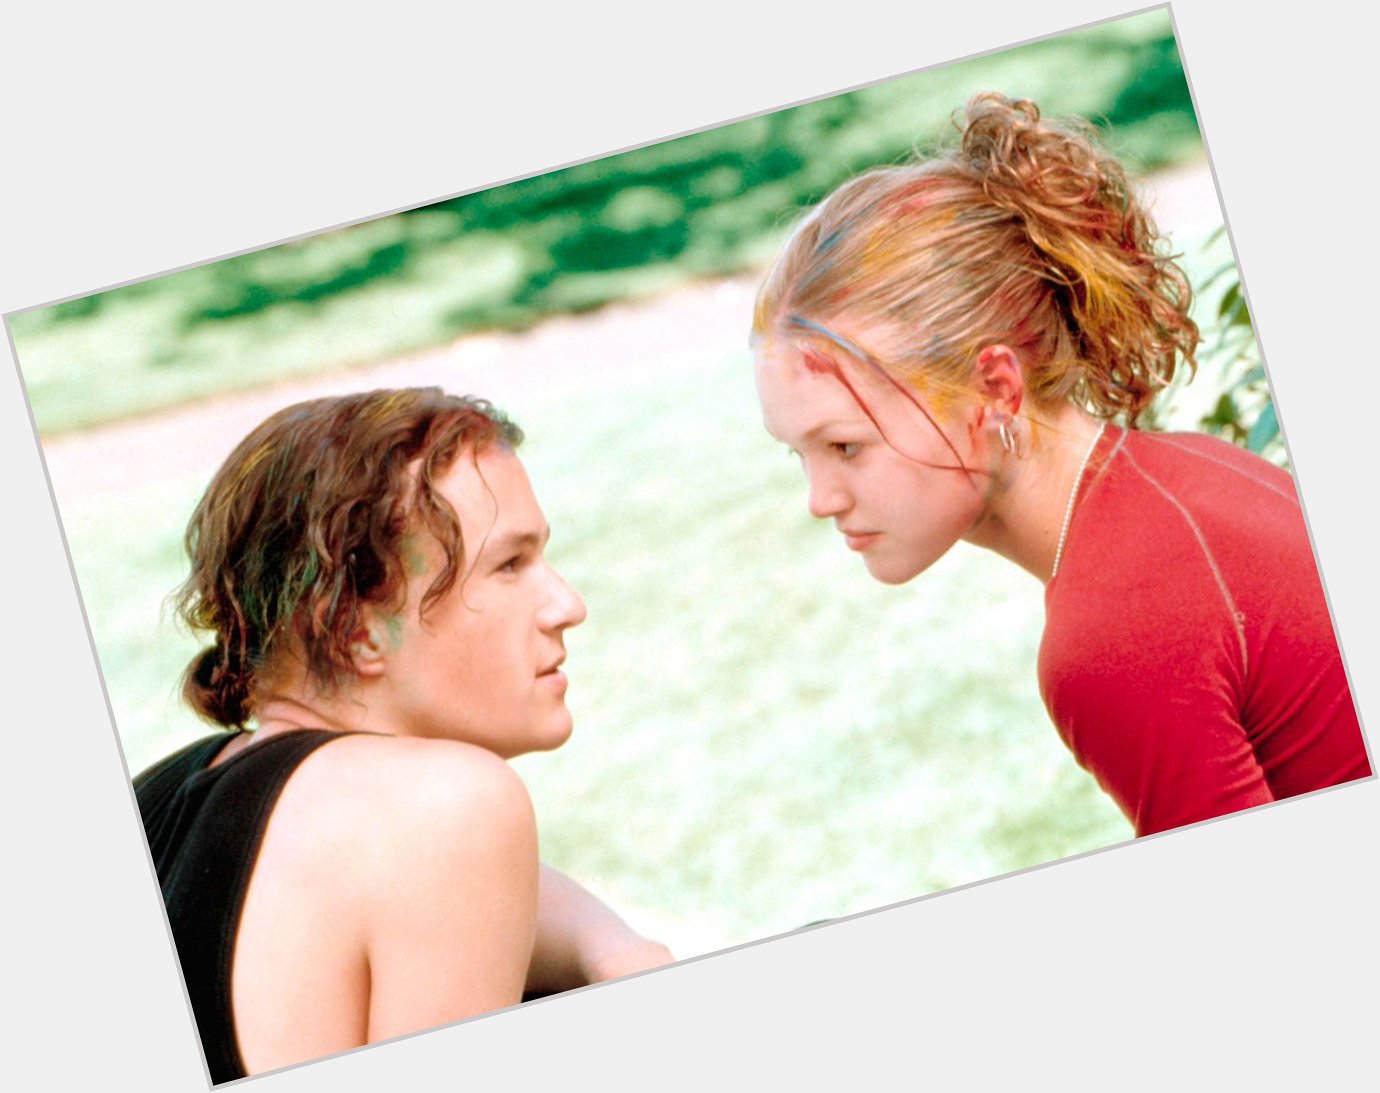 Happy 36th Birthday, Julia Stiles! Name that movie from 1999! 